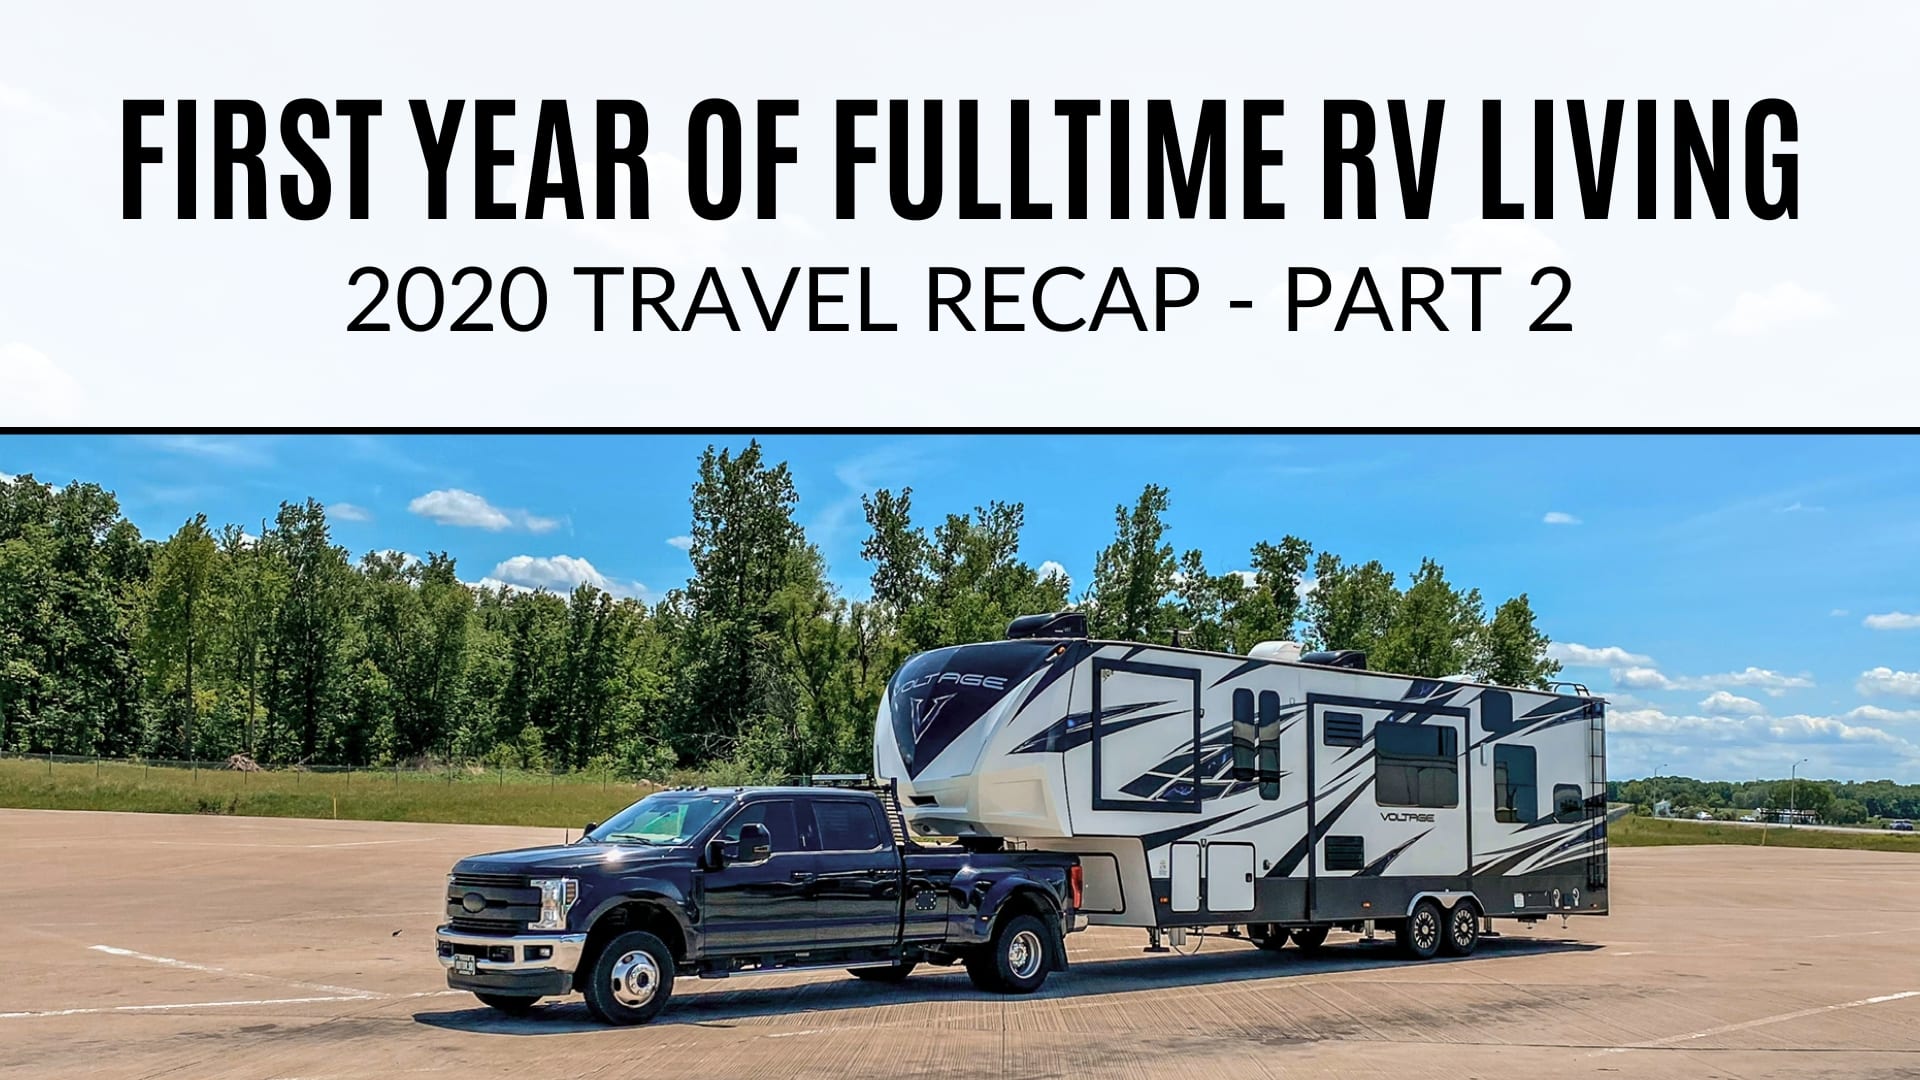 Black Ford truck pulling a white fifth wheel parked at a rest stop on a sunny day. Text on the image says "First Year of Fulltime RV Living 2020 Travel Recap - Part 2"